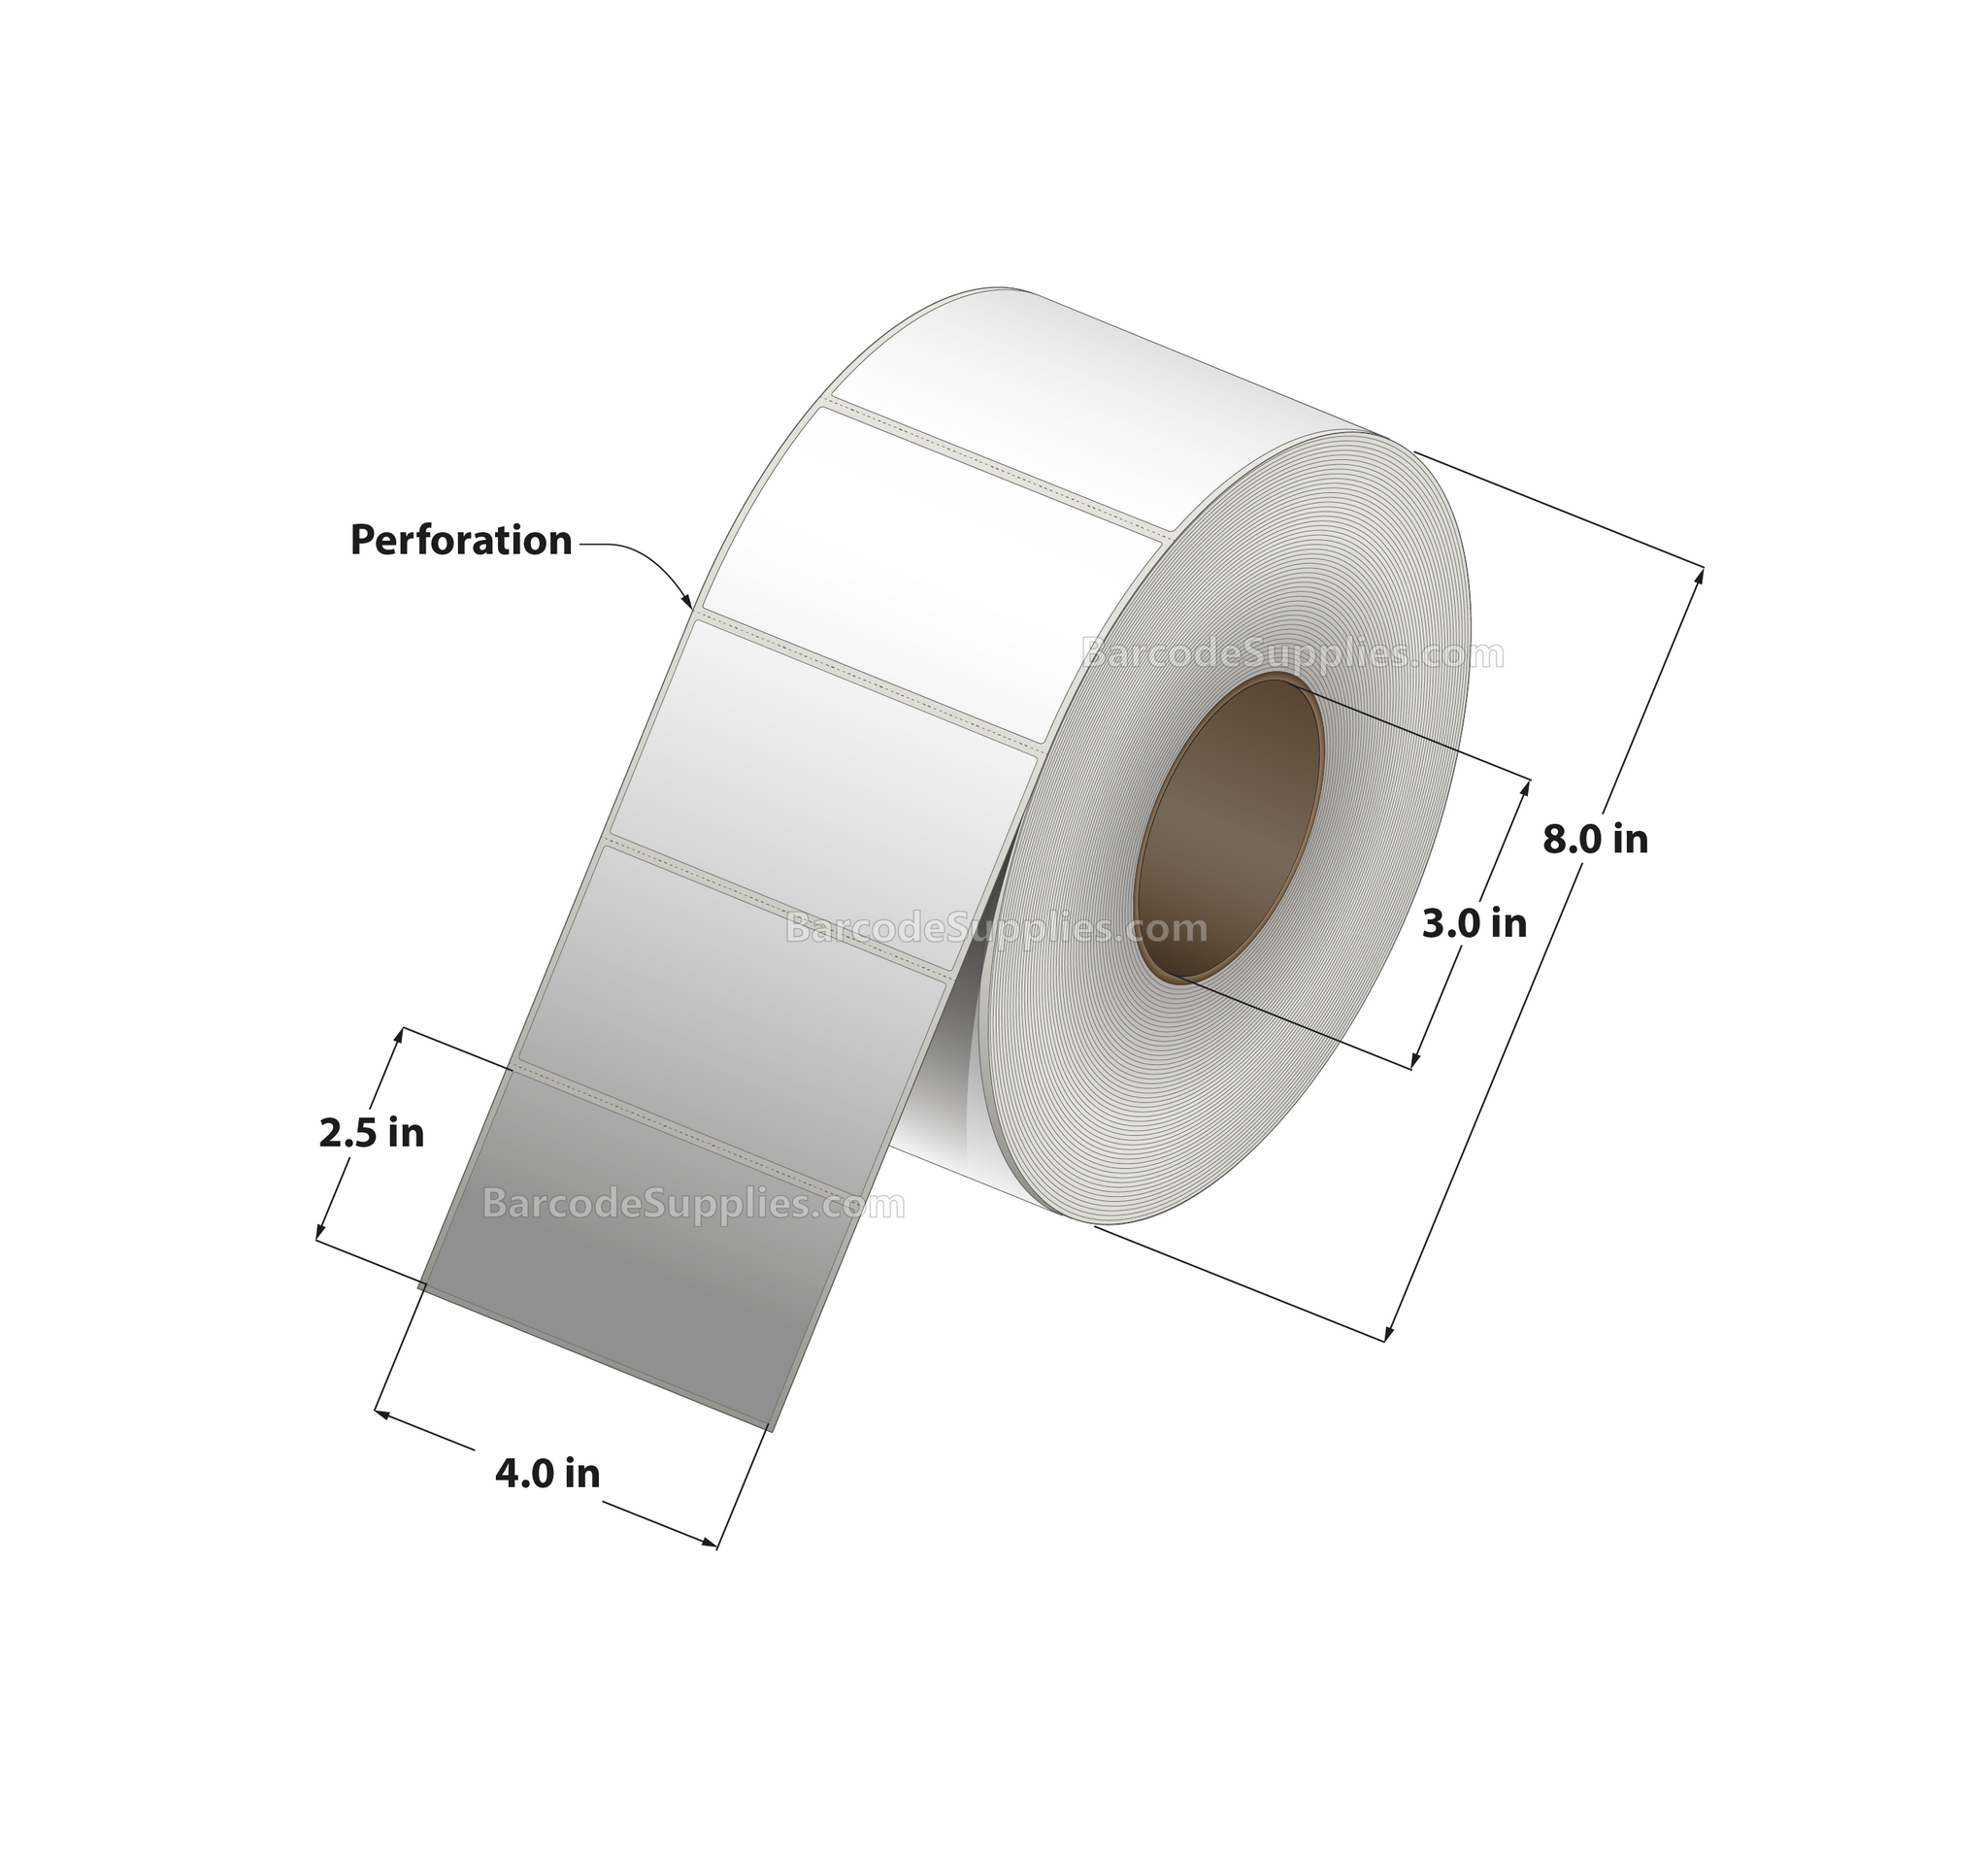 4 x 2.5 Direct Thermal White Labels With Acrylic Adhesive - Perforated - 2500 Labels Per Roll - Carton Of 4 Rolls - 10000 Labels Total - MPN: RD-4-25-2500-3 - BarcodeSource, Inc.